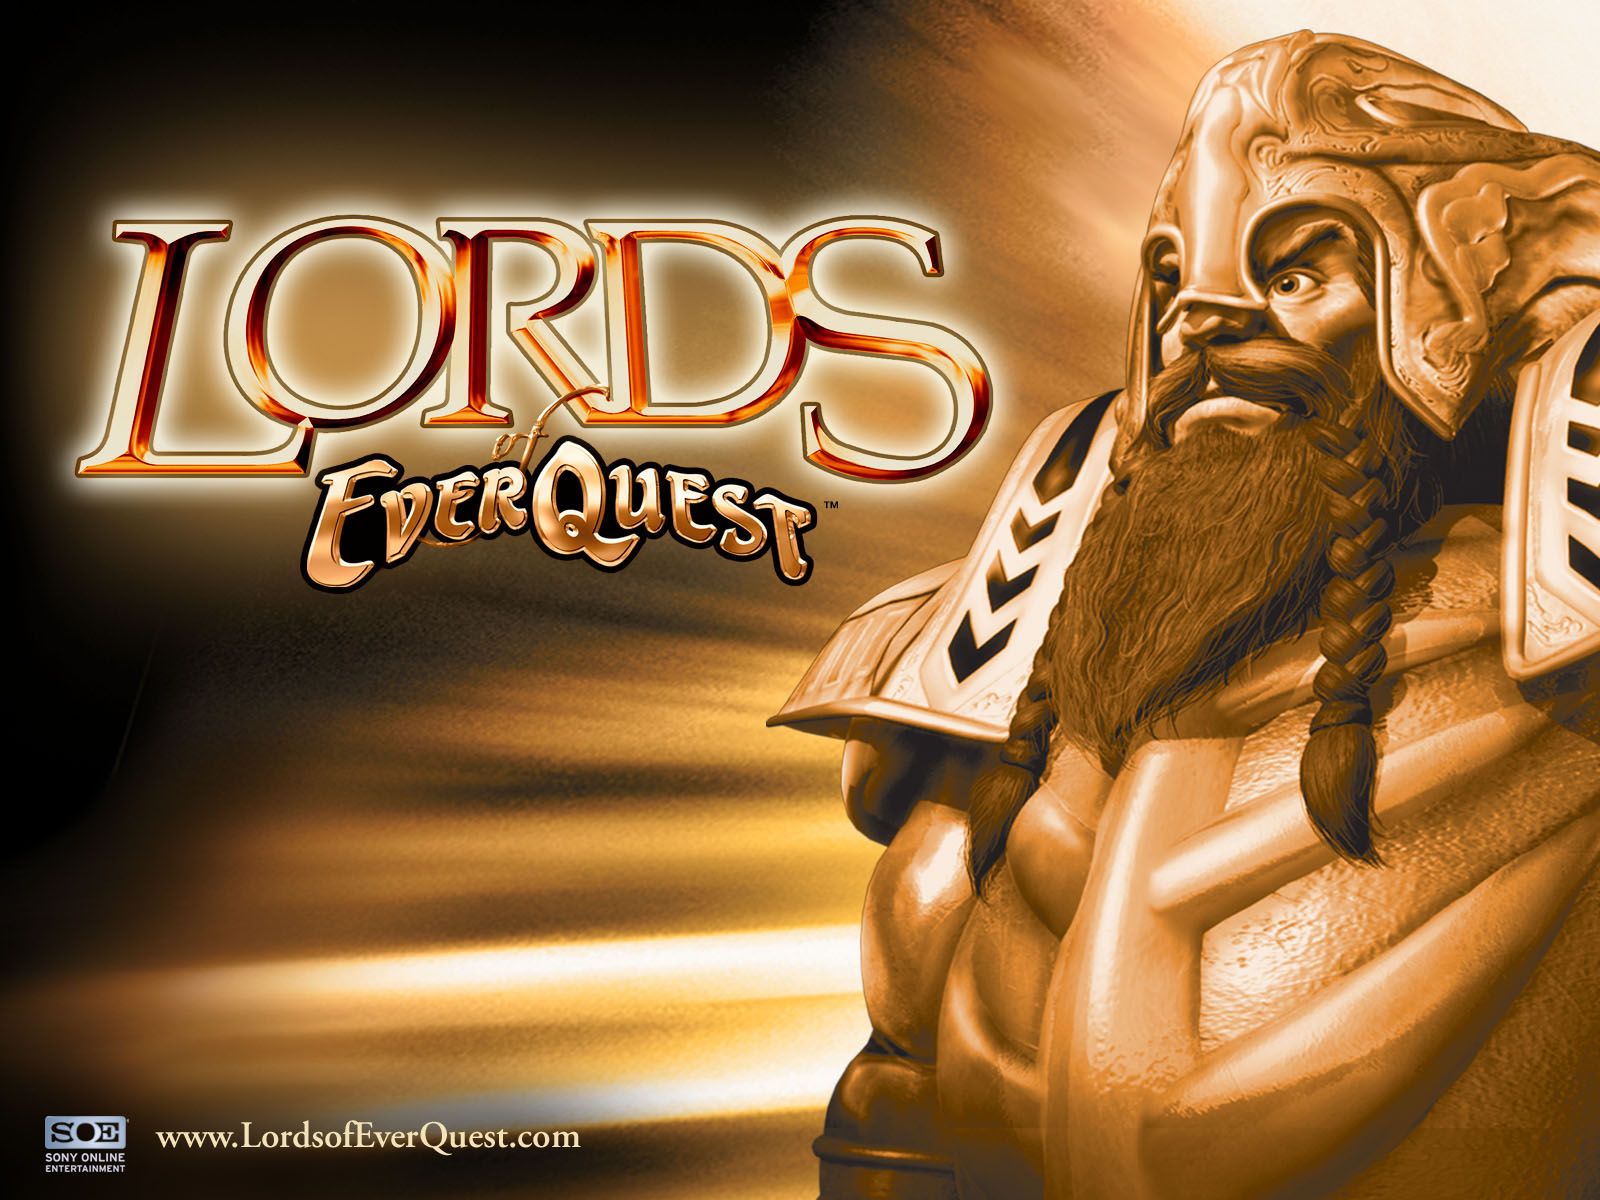 Wallpapers for Lords of EverQuest, select size: 1600x1200 1280x1024